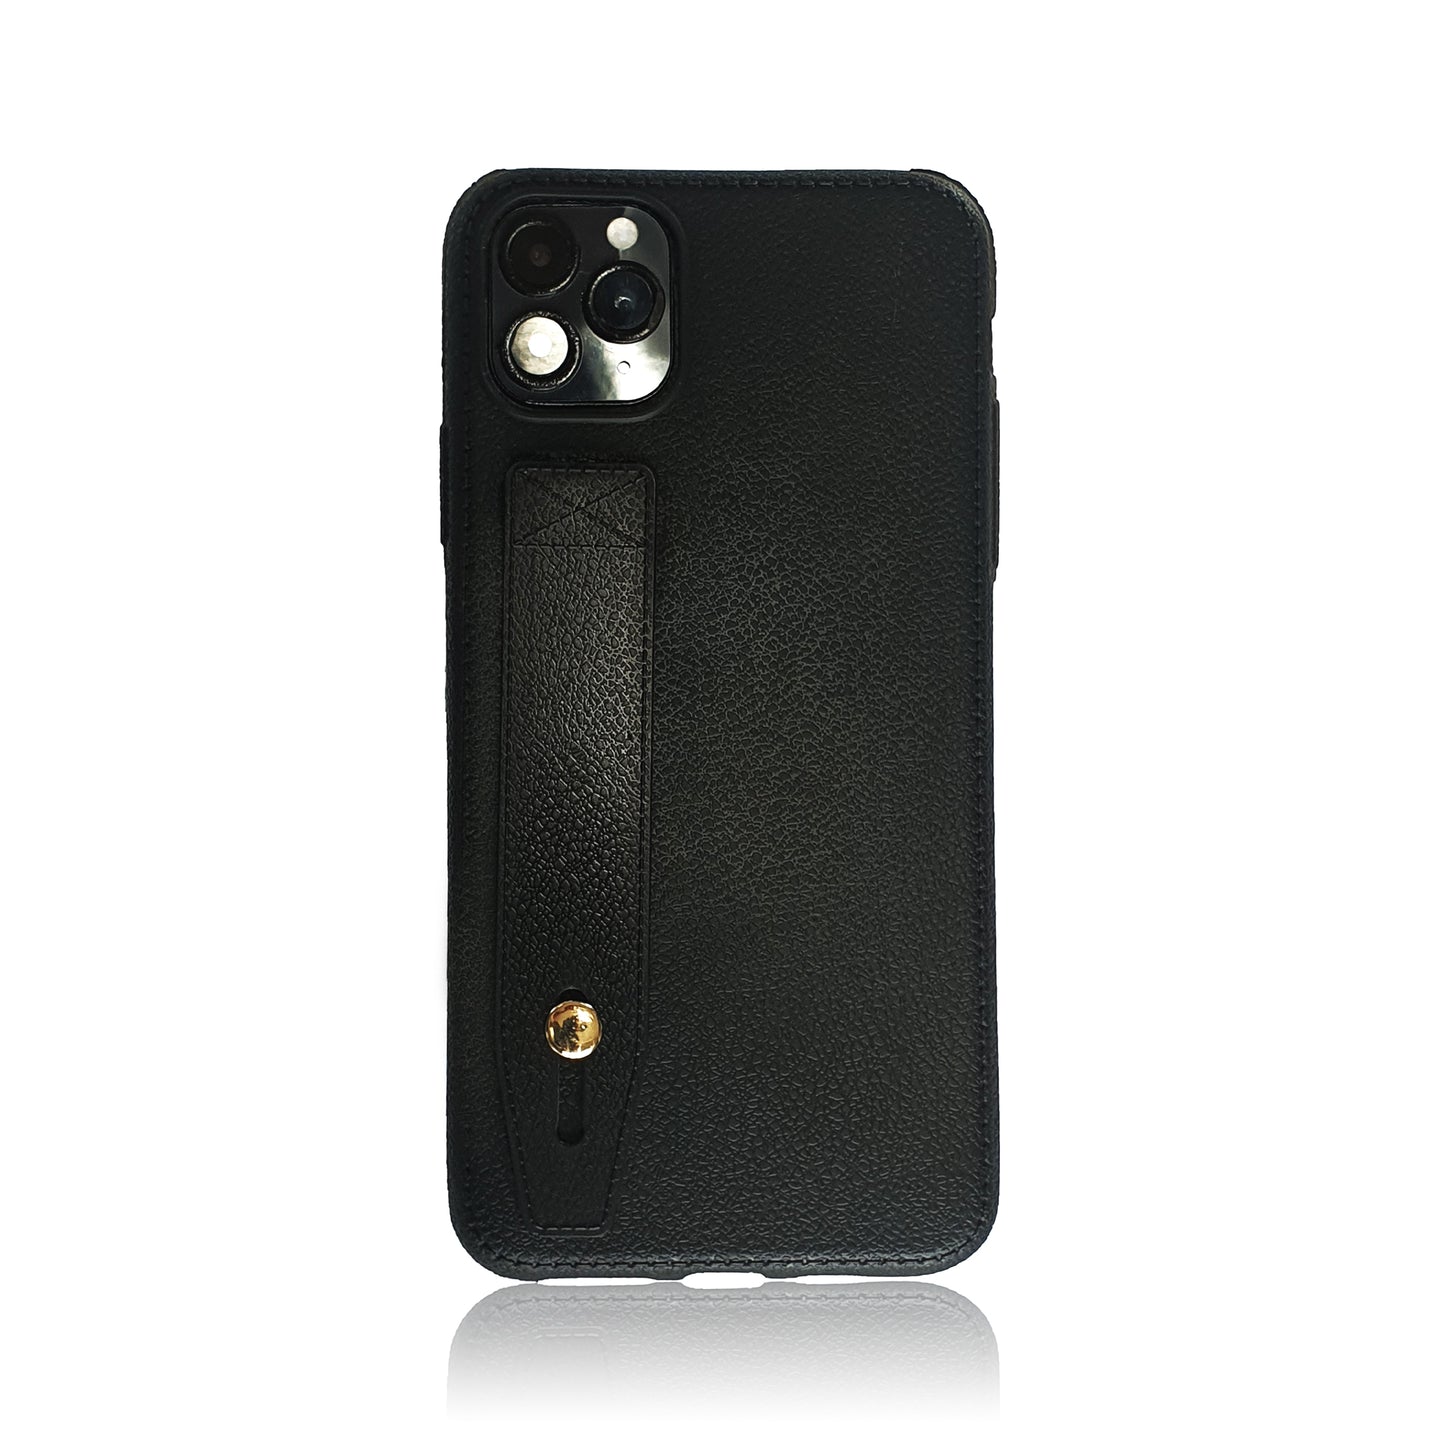 Black Leather iPhone Case with Strap